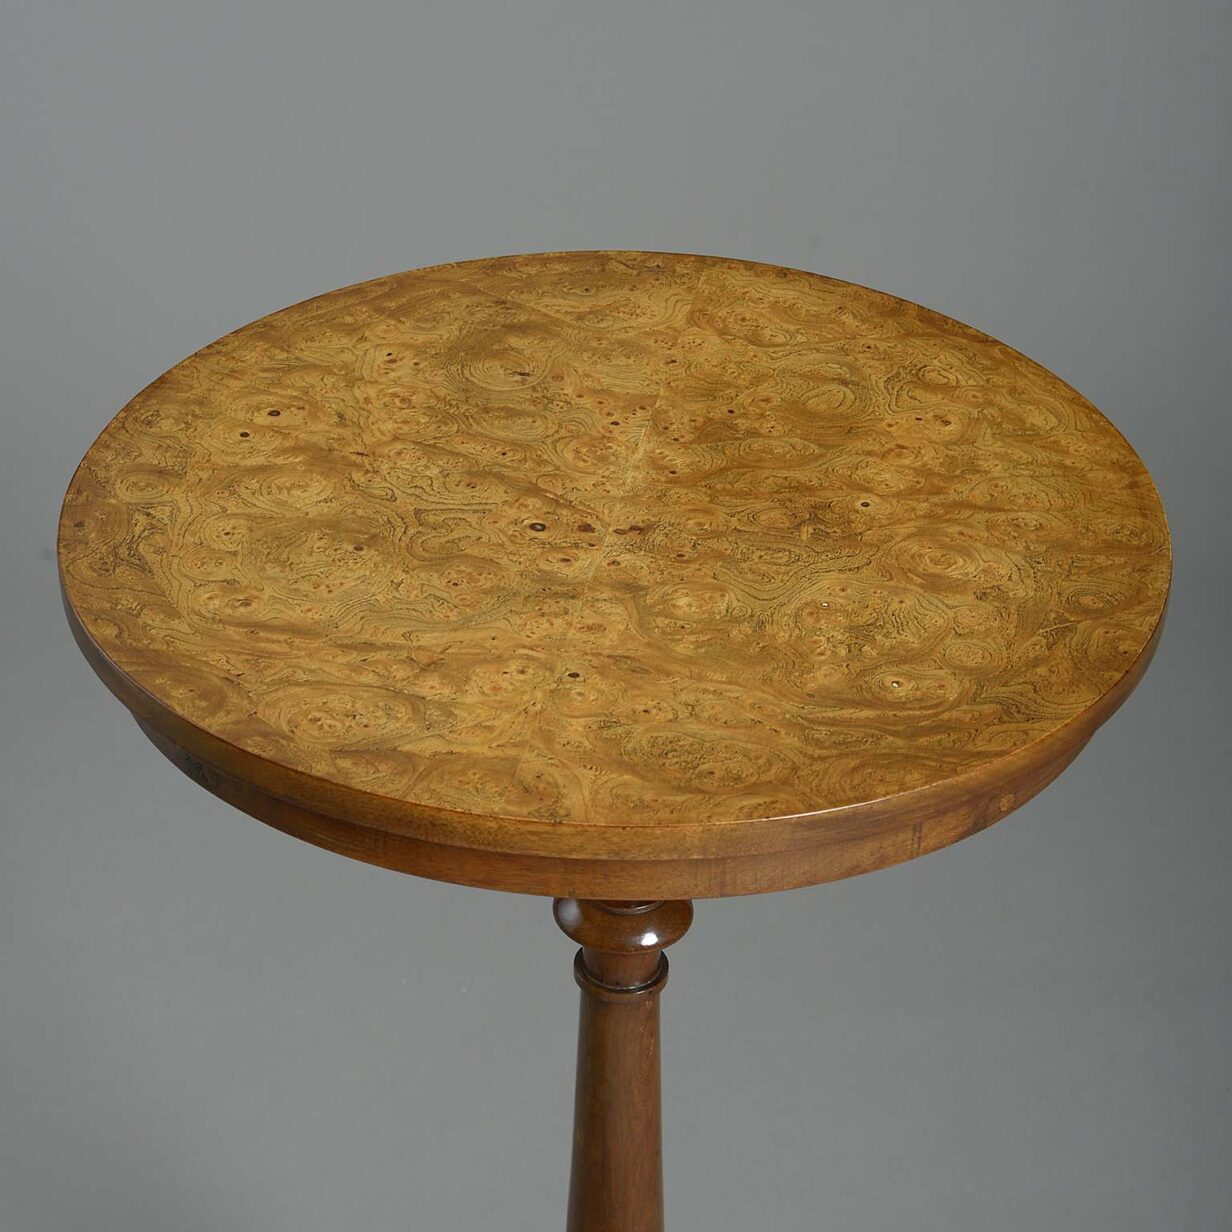 Early 19th century regency period burr elm occasional table